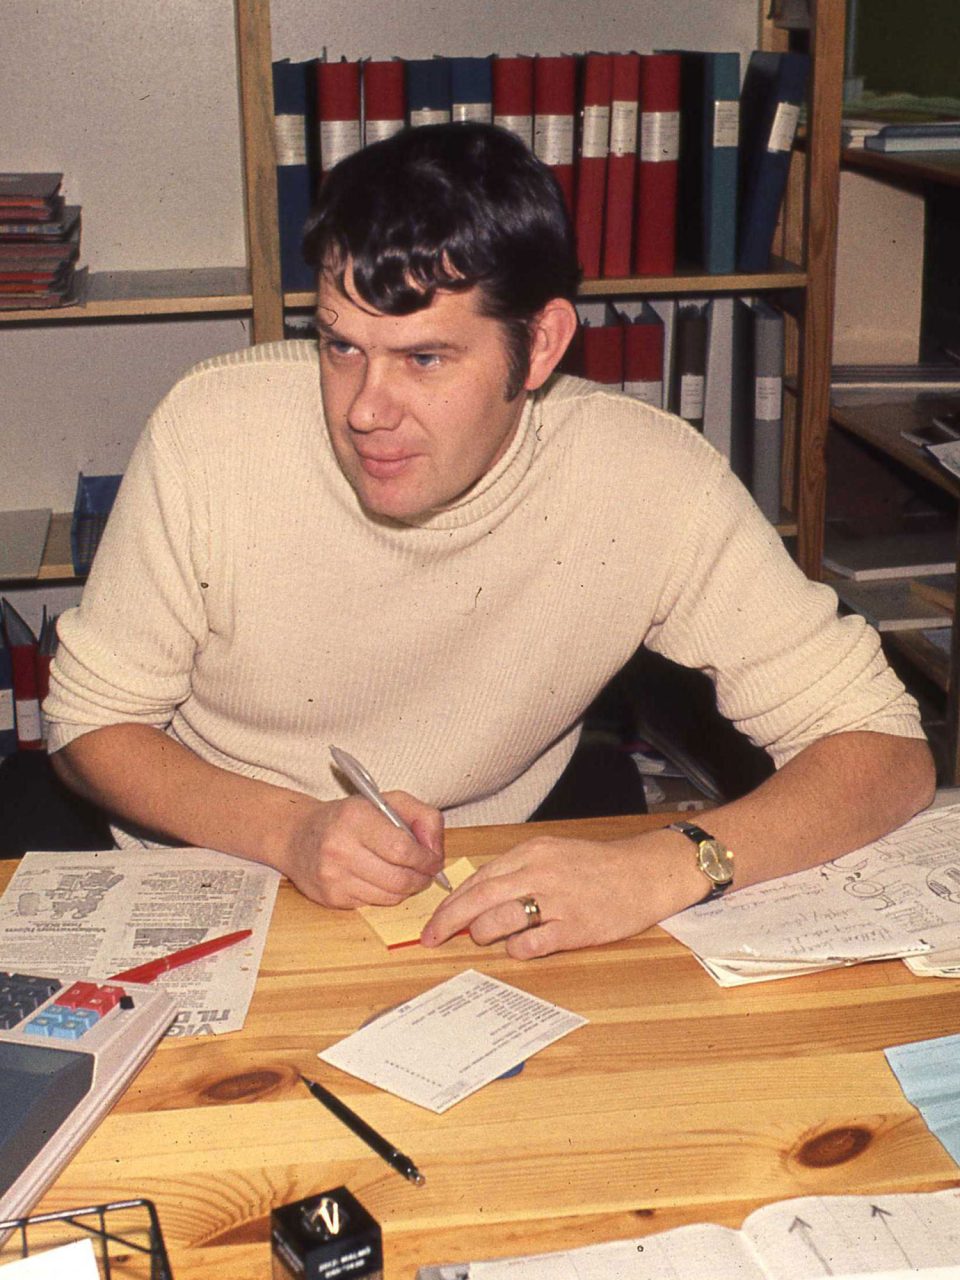 A young dark-haired man, Lars Göran Peterson, working at a desk.